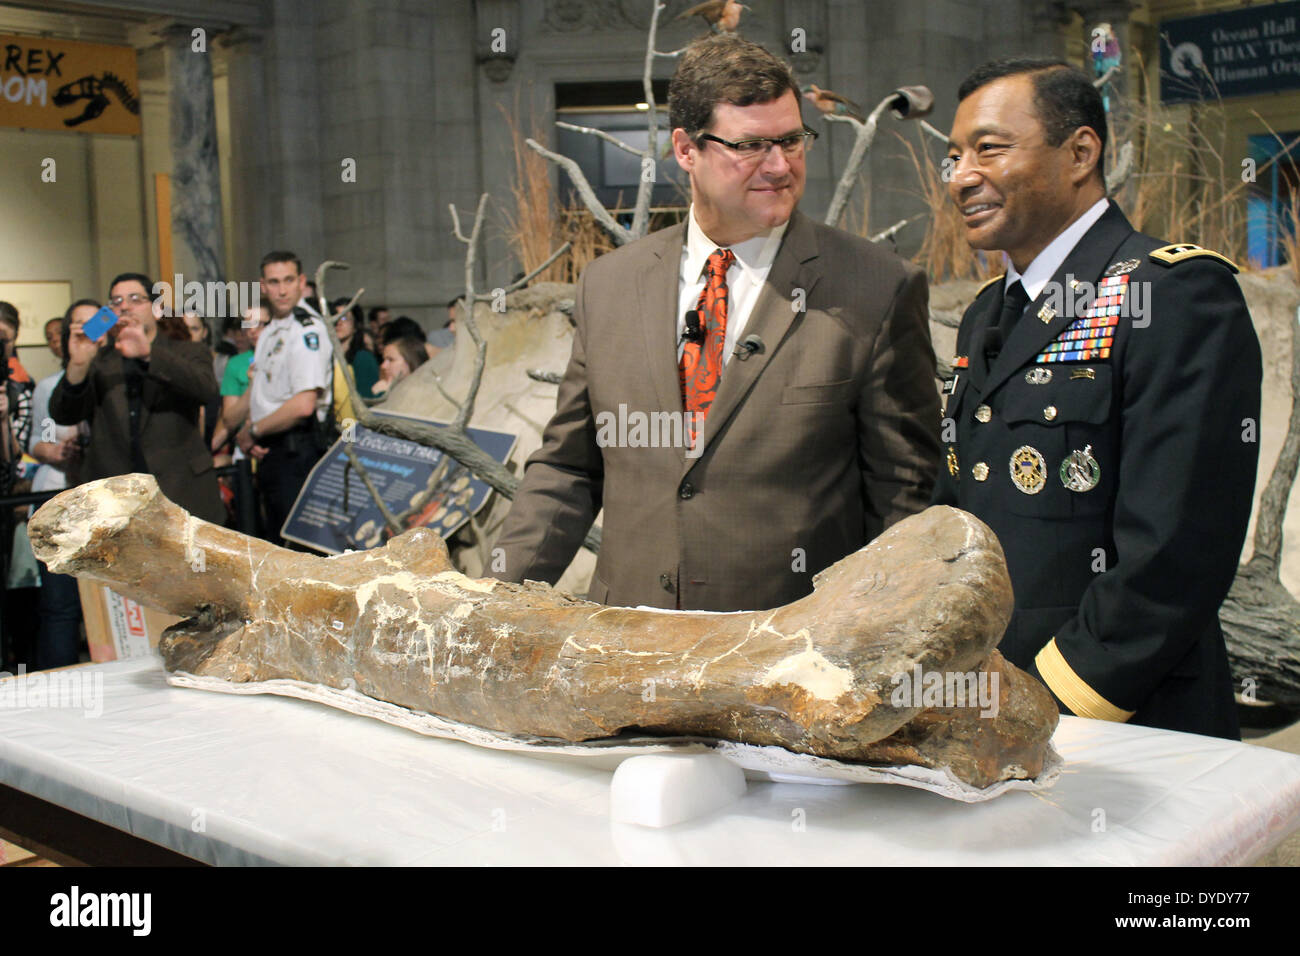 Kirk Johnson (L), director of the natural history museum in Washington, and Lieutnant General Thomas Bostick, Commander of the engineers of the US army, present a thigh bone of the newly arrived Tyrannosaurus rex in the natural history museum in Washington, USA, 15 April 2014. The bones will be the new highlight of the dinosaurs exhibitions. Photo: Louisa Klink/dpa Stock Photo